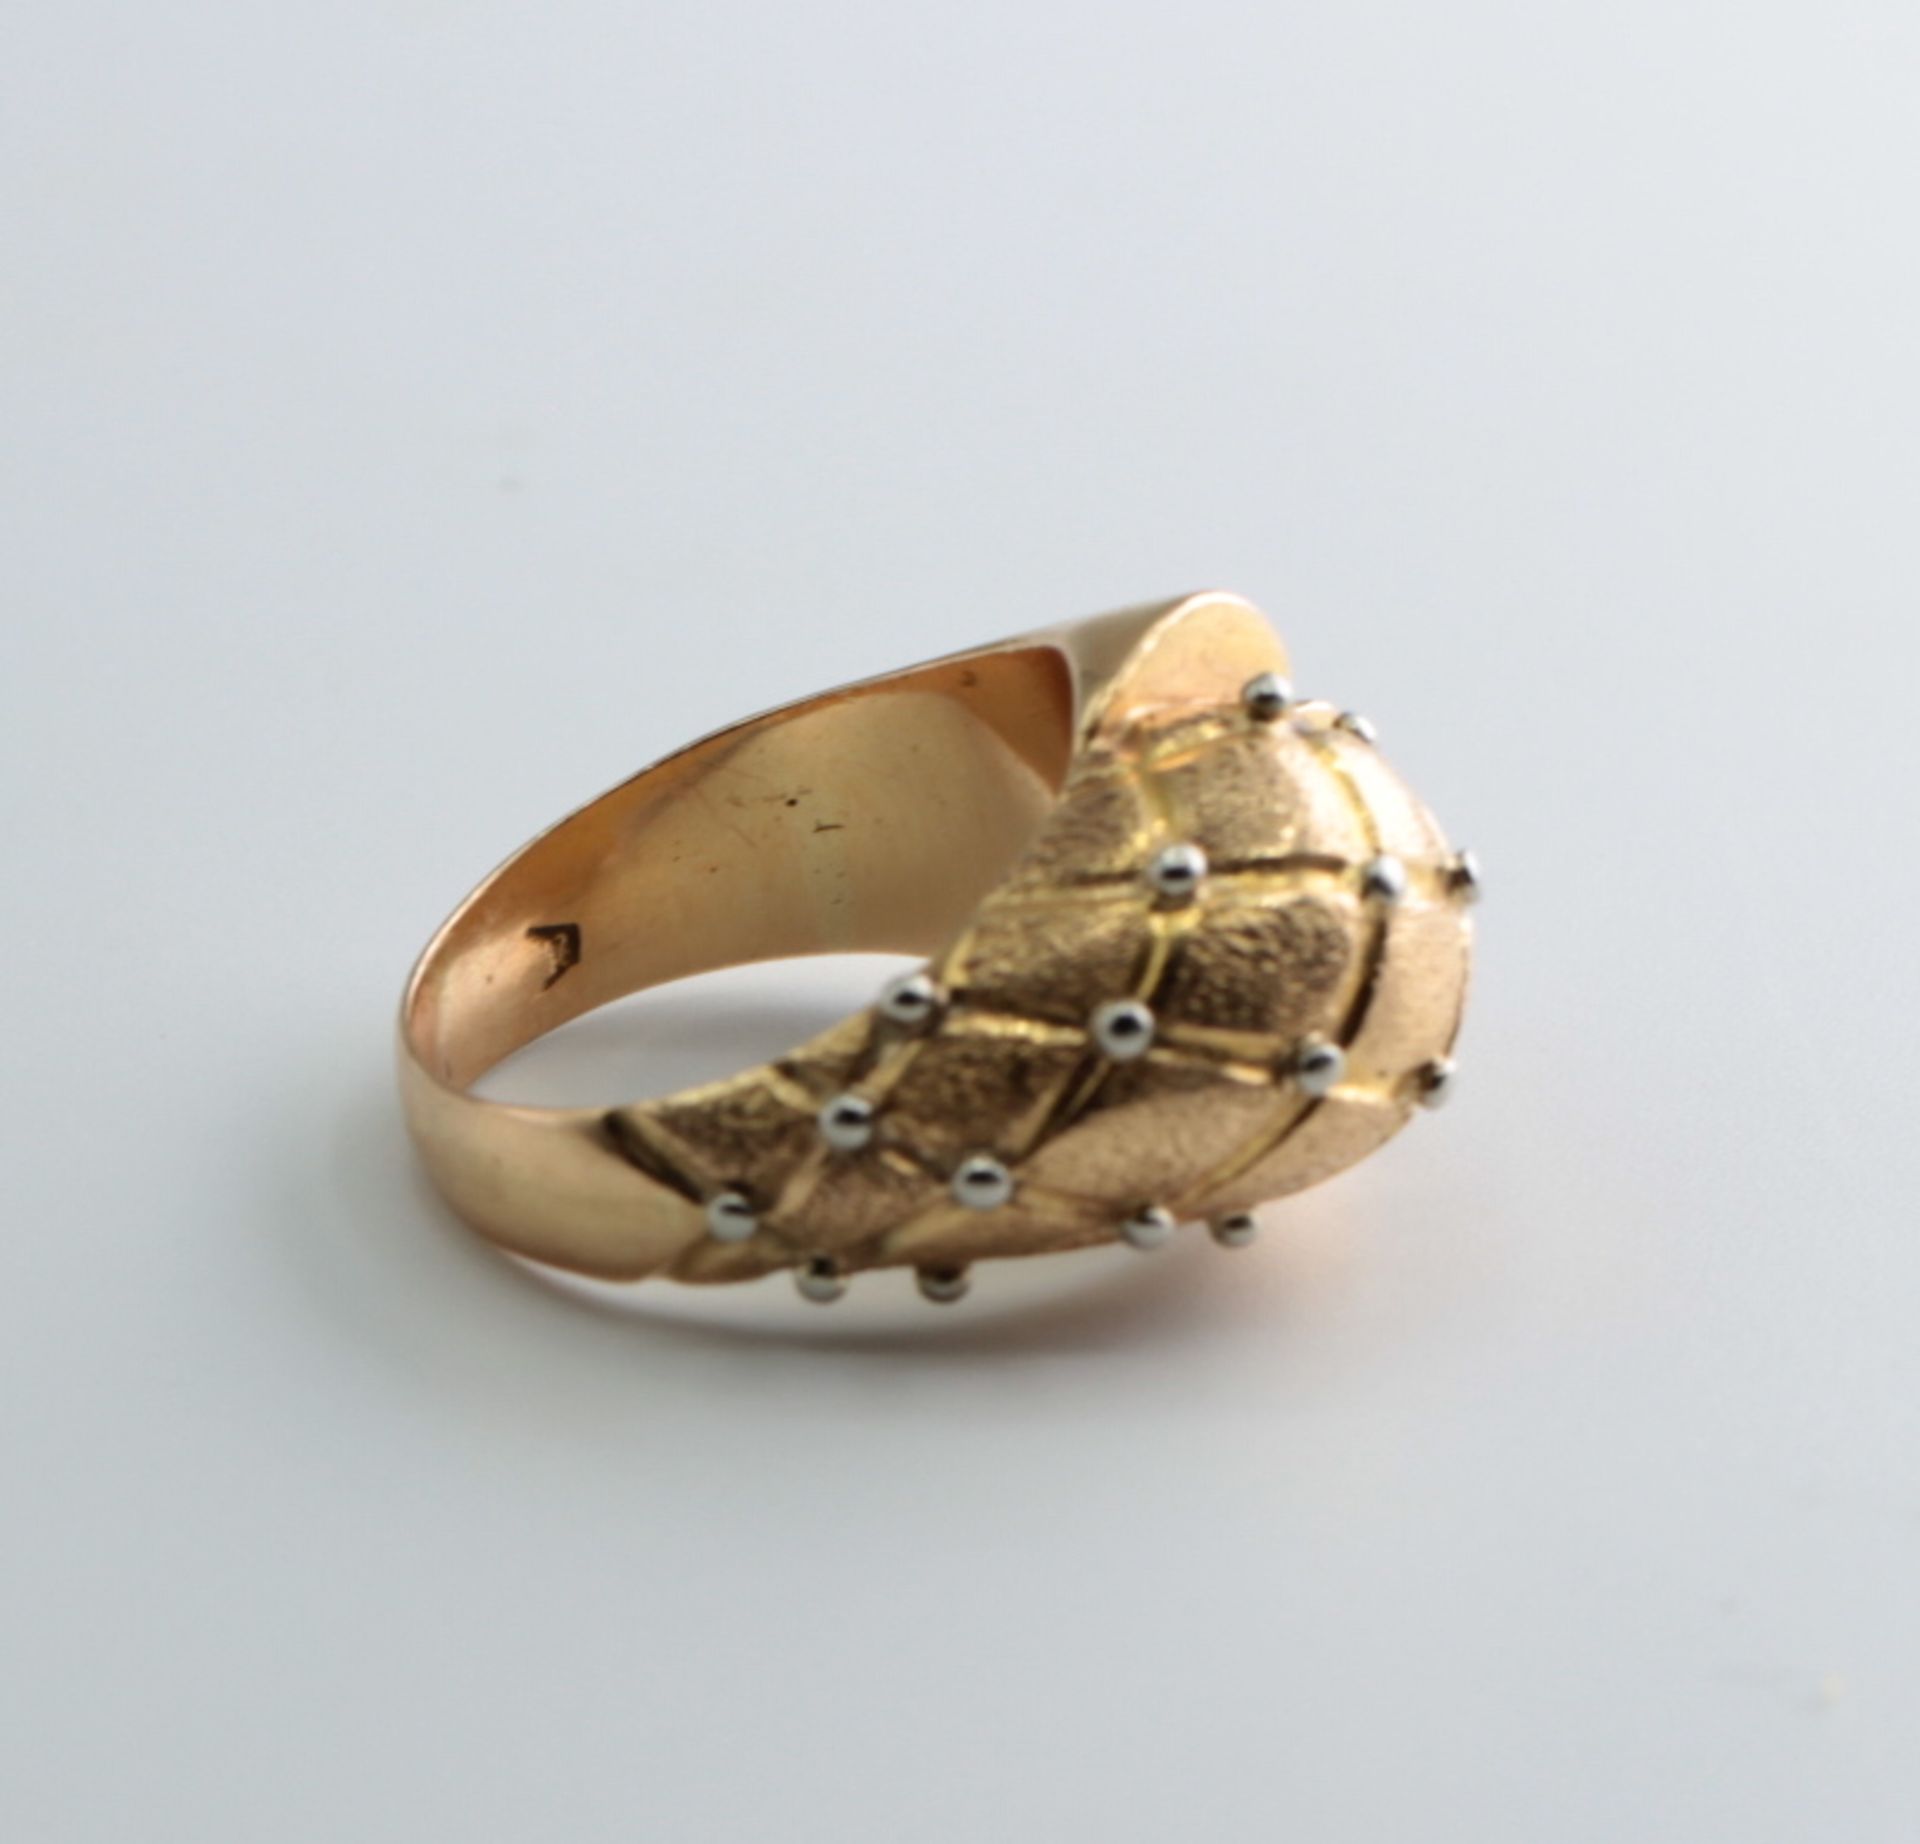 Designer ring, 750 yellow gold with white gold - Image 4 of 4